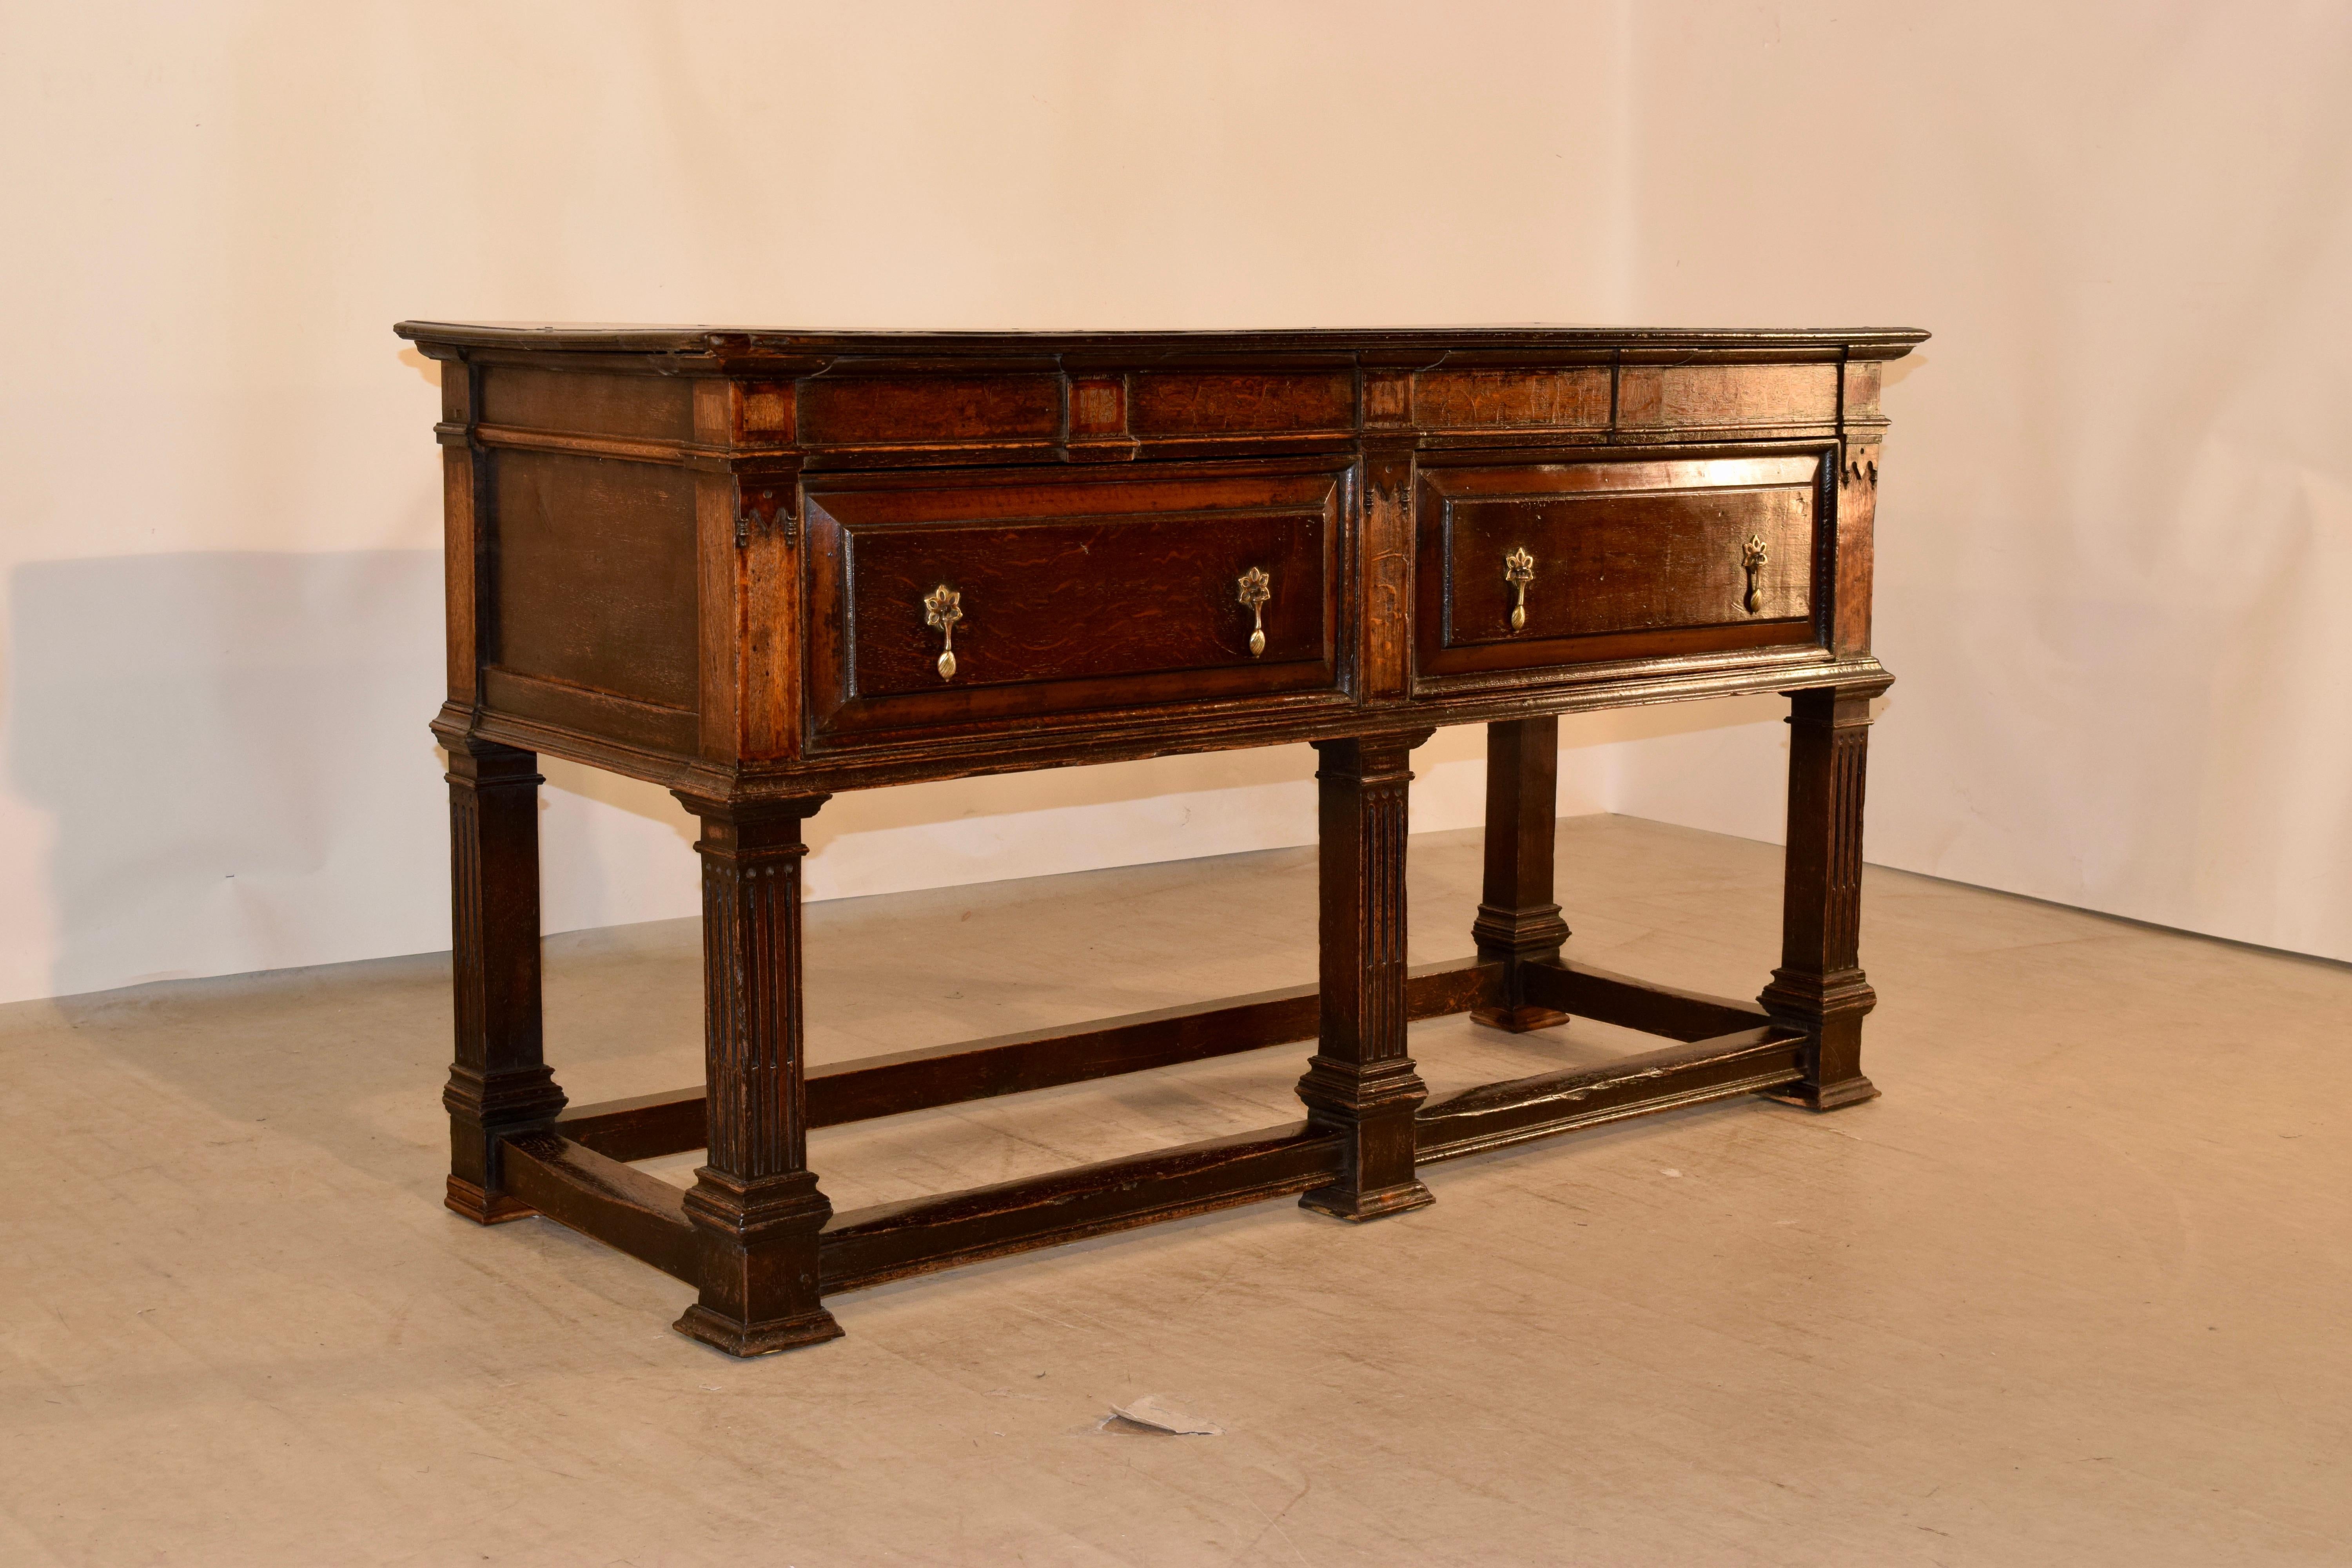 19th century oak sideboard from Wales. The top is made from two planks and has beveled edges and pegged construction. This follows down to paneled sides and two drawers in the front, beneath an inlaid apron and molded edge. The piece is supported on